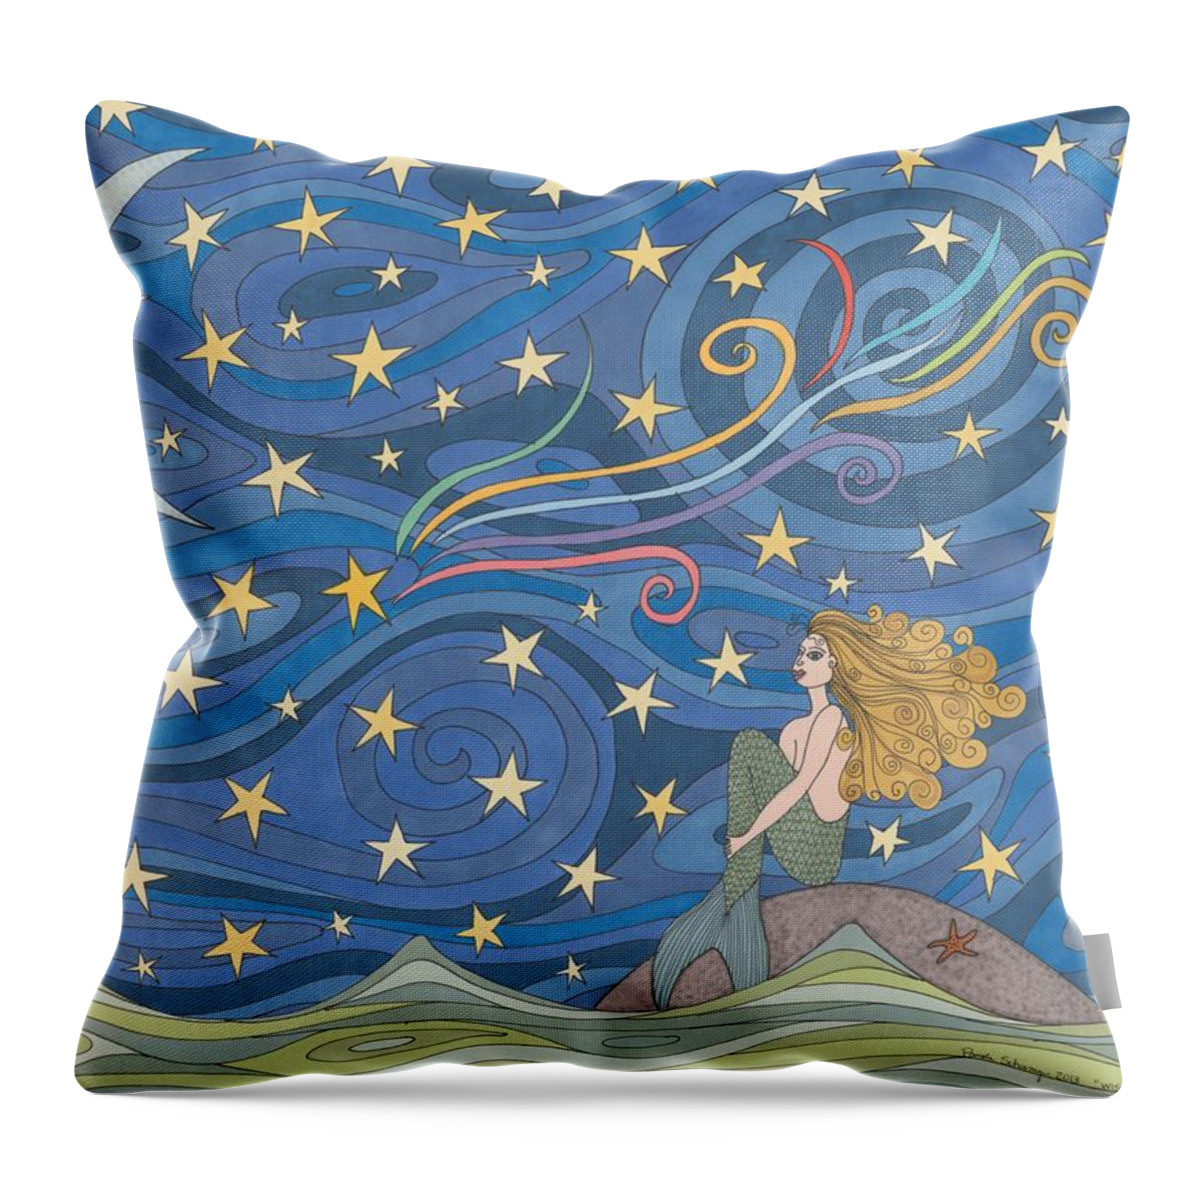 Mermaid Throw Pillow featuring the drawing Wishing by Pamela Schiermeyer